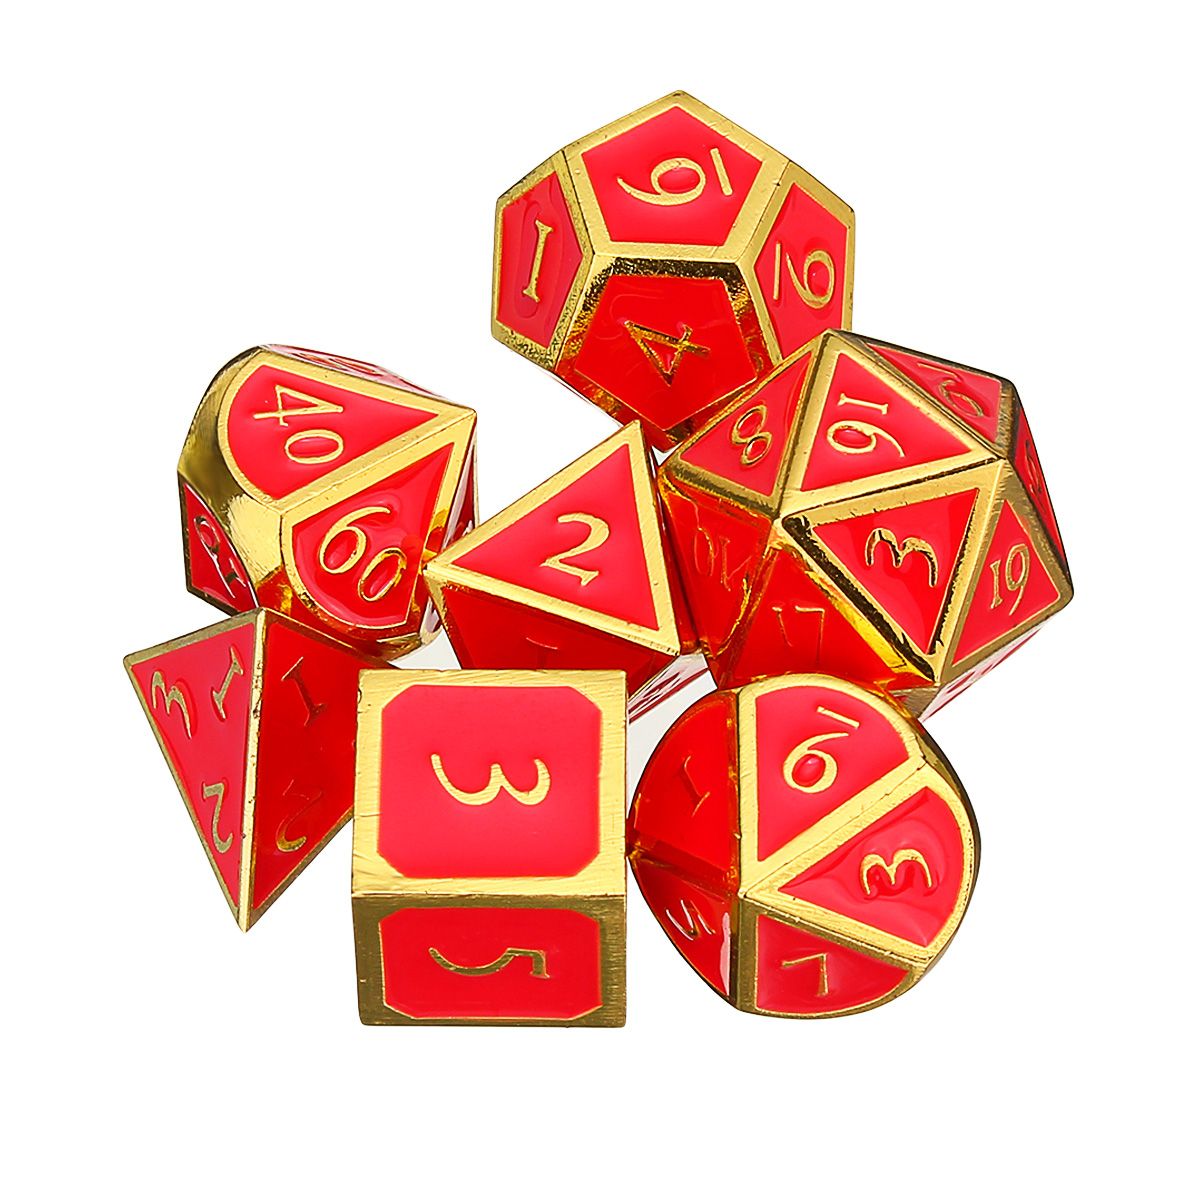 7Pc-Solid-Metal-Heavy-Dice-Set-Polyhedral-Dice-Role-Playing-Games-Dices-Gadget-RPG-Dices-Set-1414782